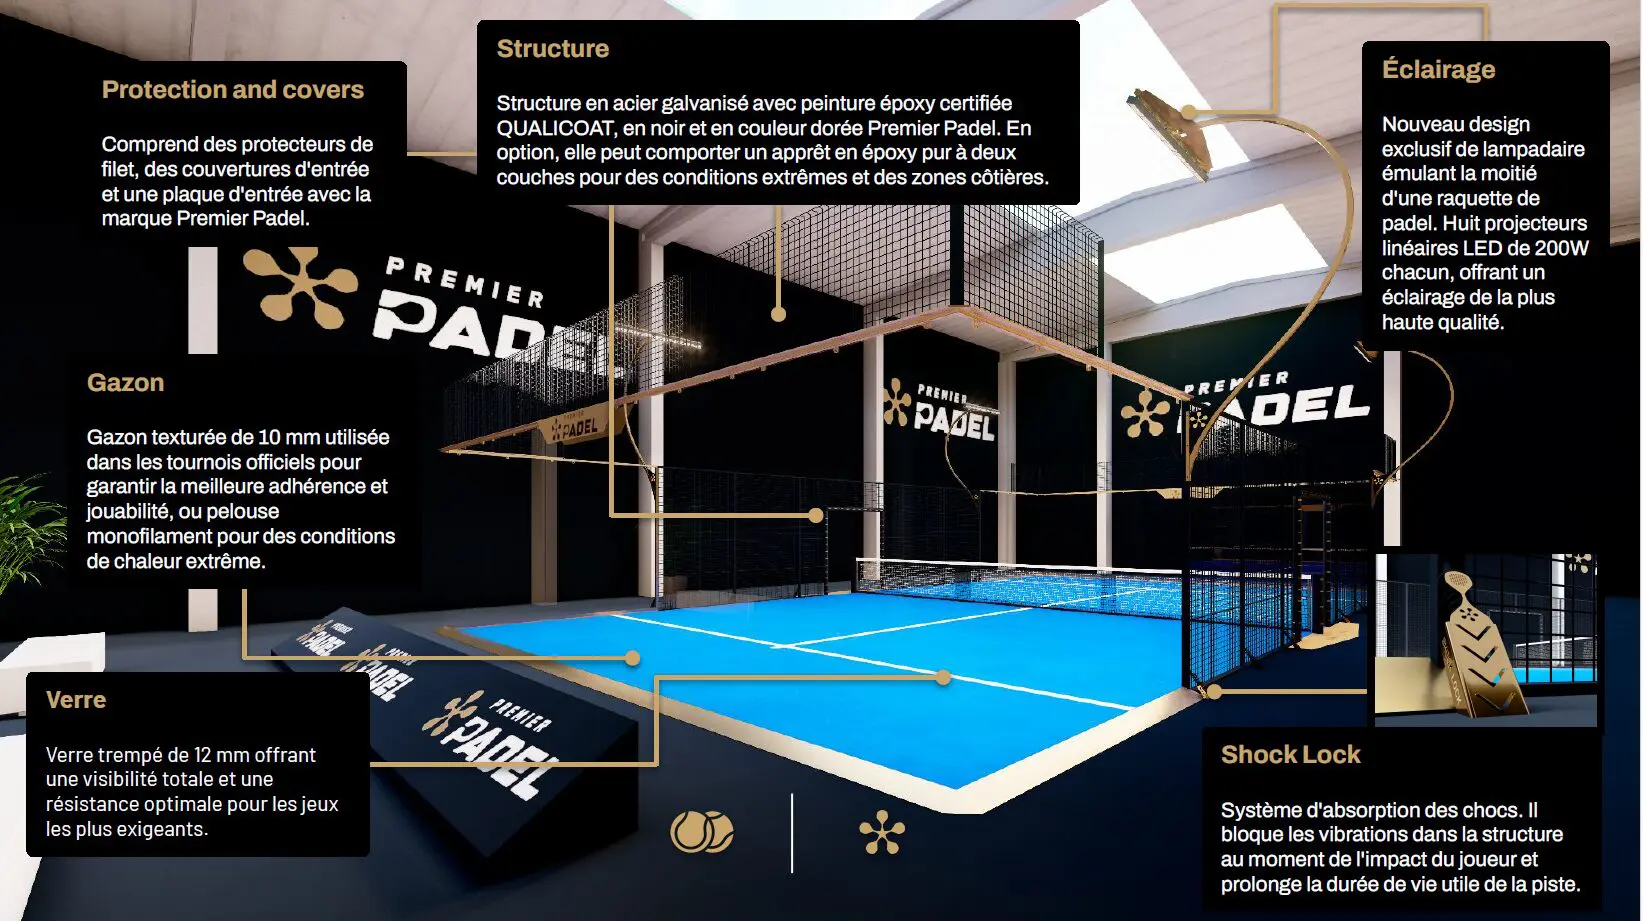 France Padel and MejorSet present their track “Premier Padel” and the “Shock Lock”